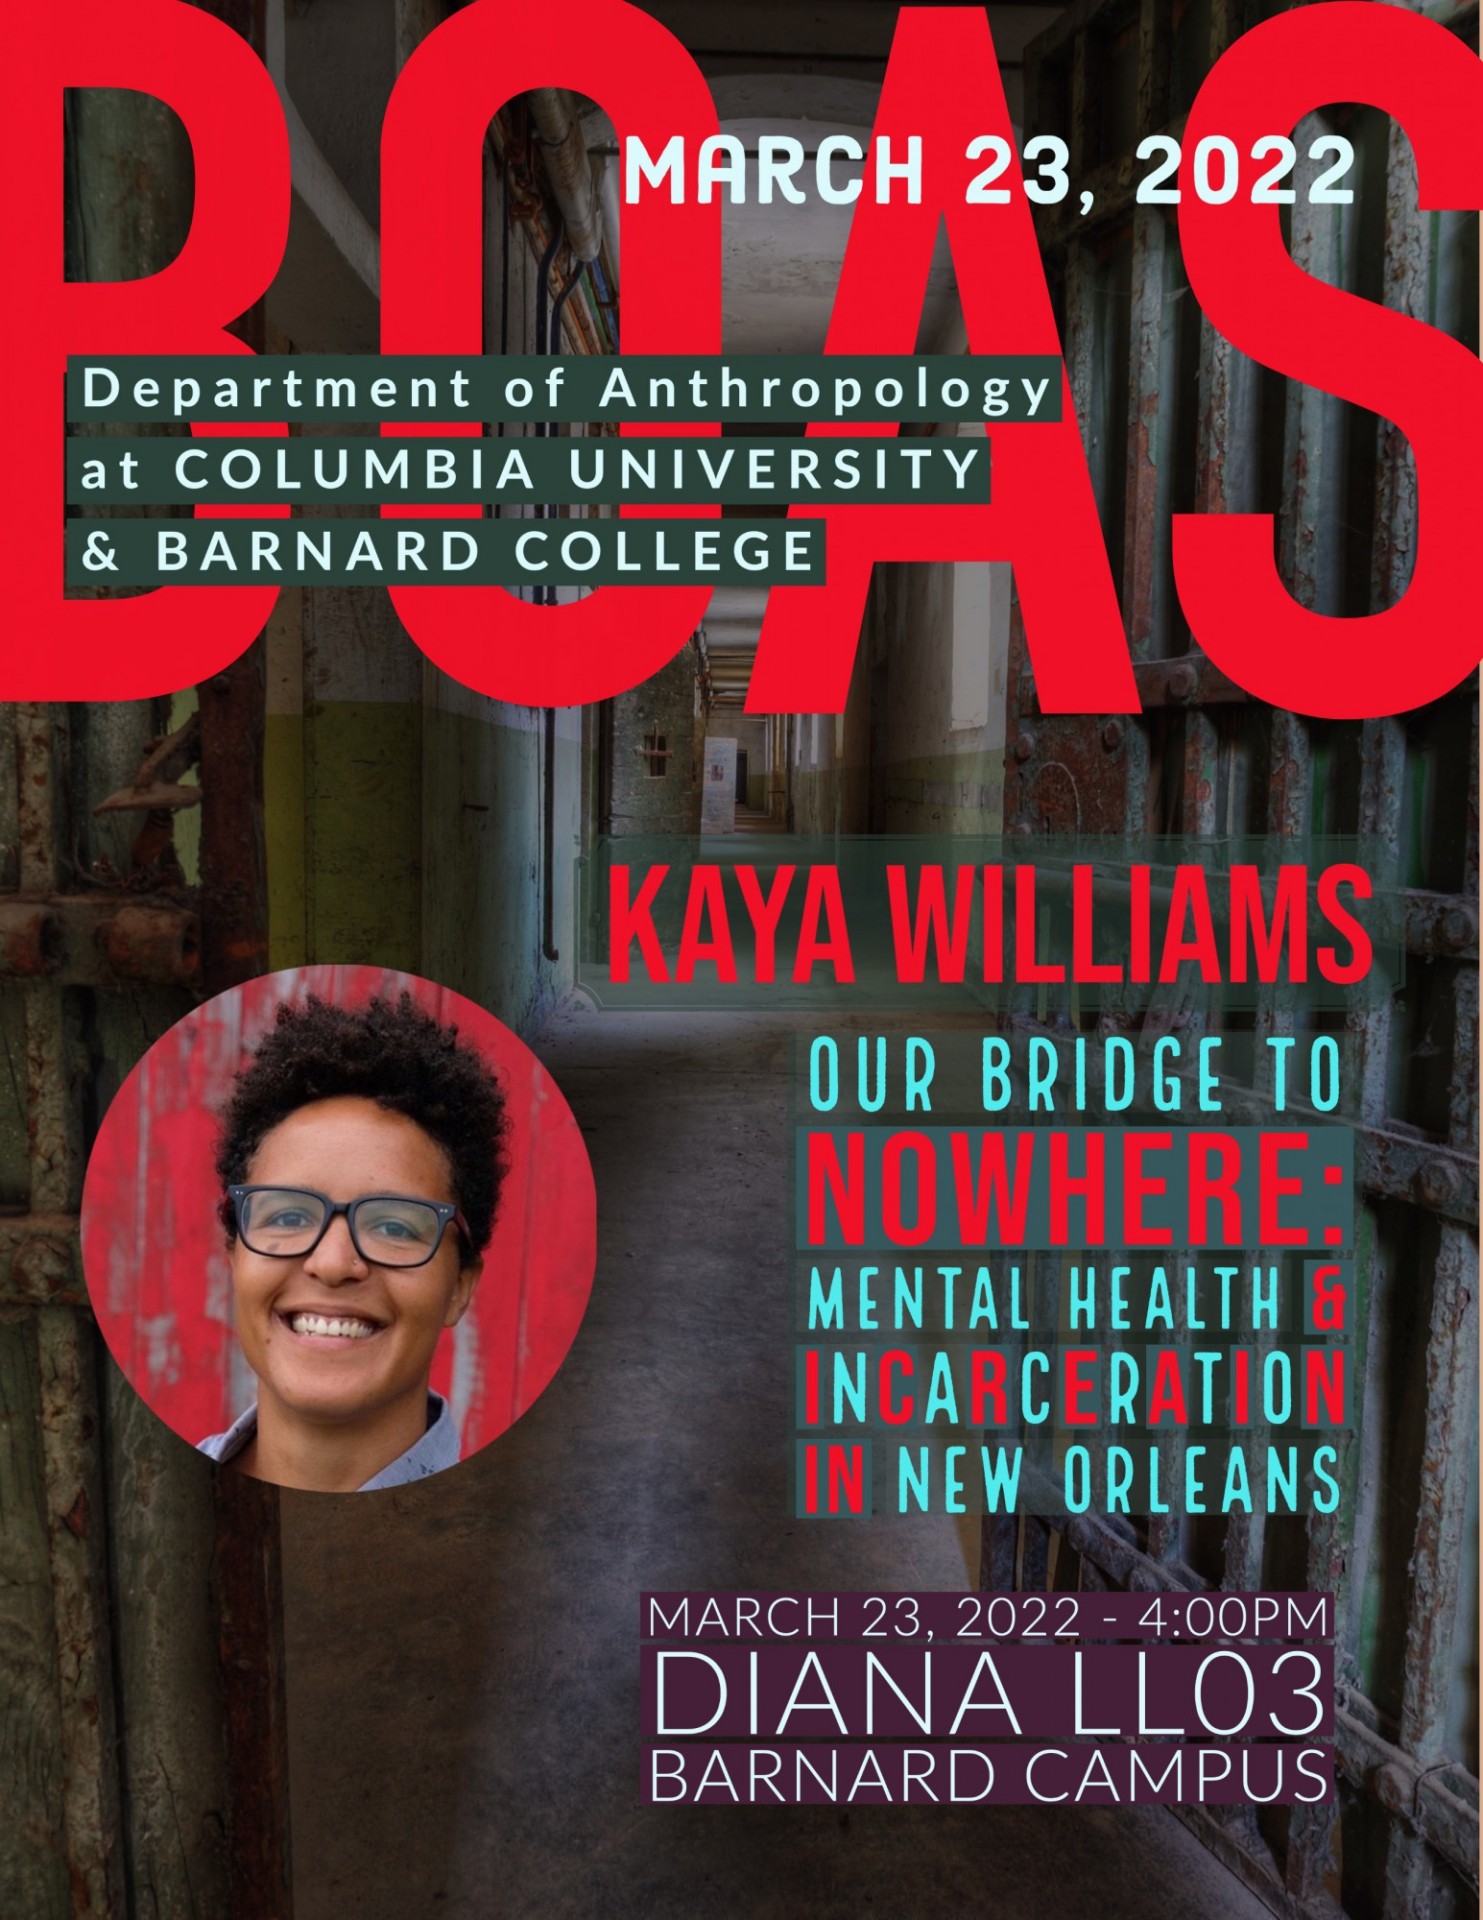 BOAS Seminar poster: March 23, 2022, Kaya Williams, Our Bridge to Nowhere: Mental Health and Incarceration in New Orleans